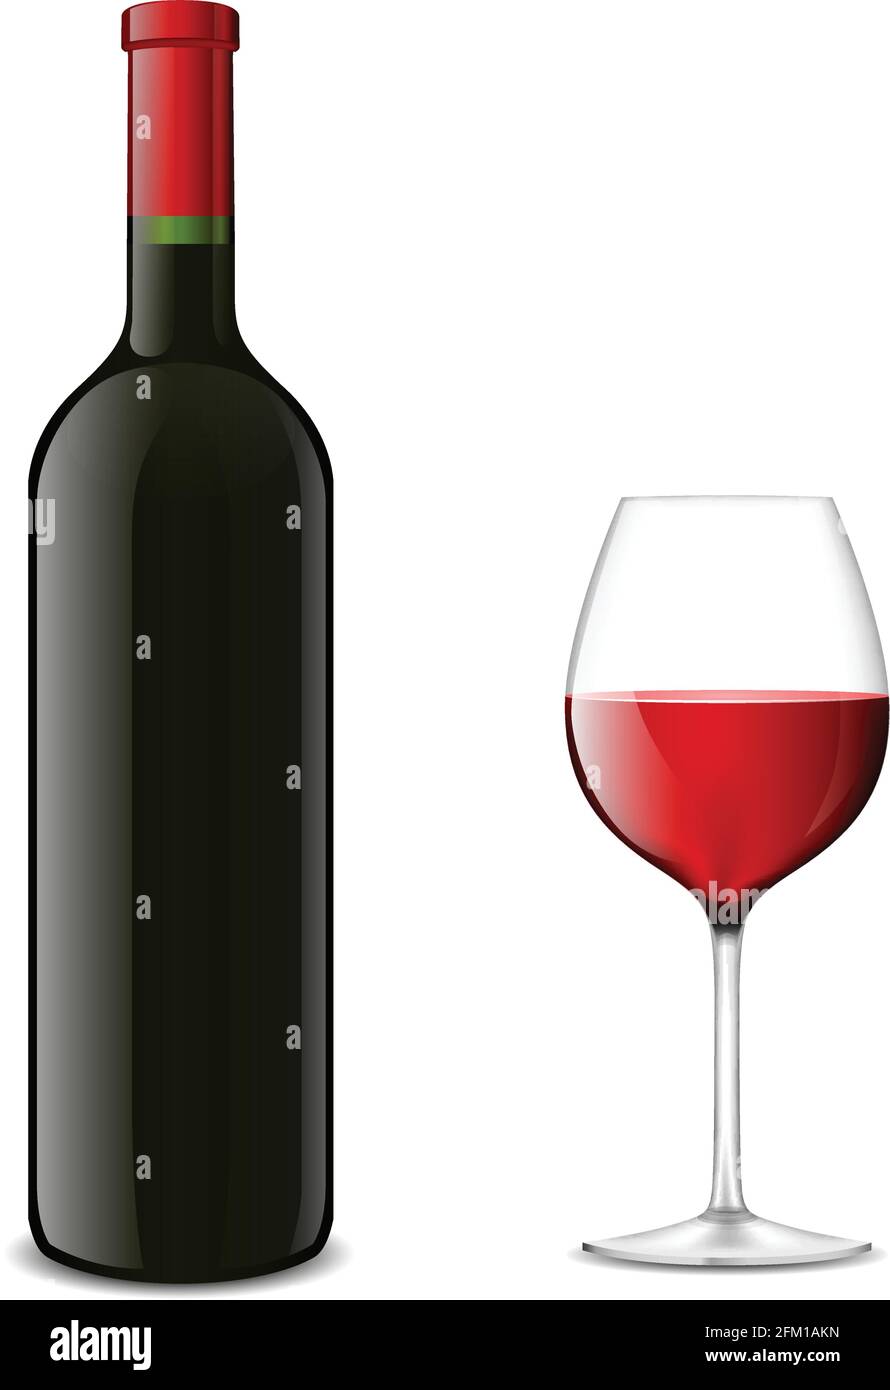 Illustration of vector wine bottle with glass Stock Vector